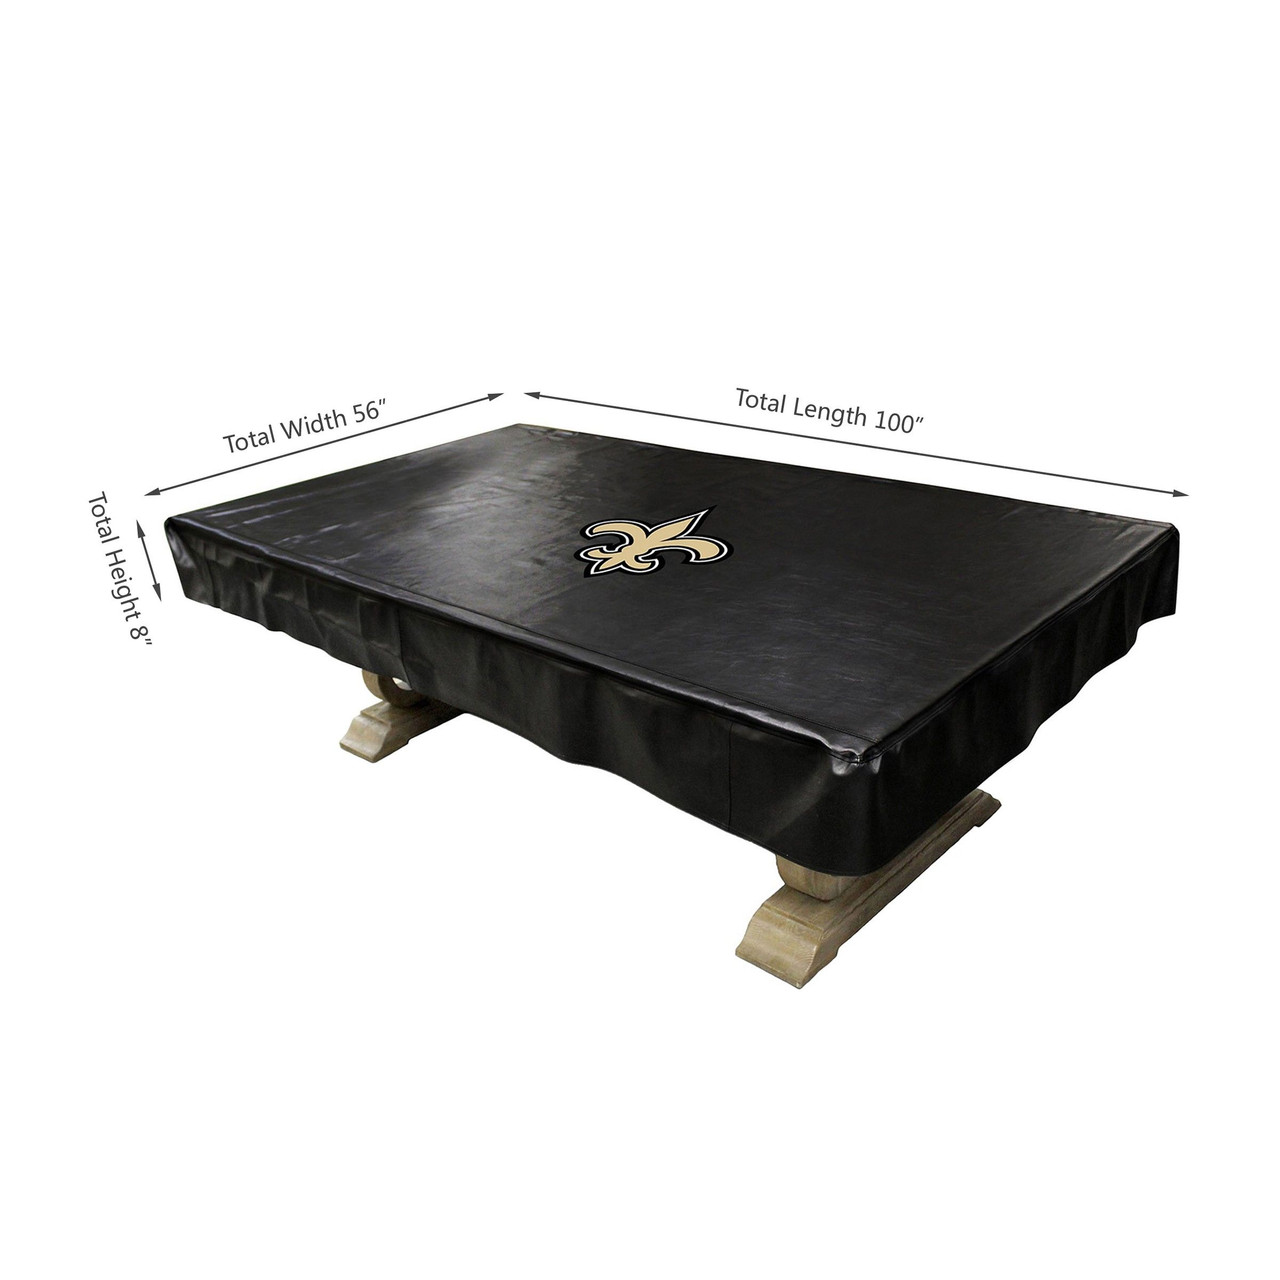 80-1031, NO, NOLA, New Orleans, Saints, 8-ft, Deluxe. Billiard, Pool, Table, Cover, FREE SHIPPING, 720808010314